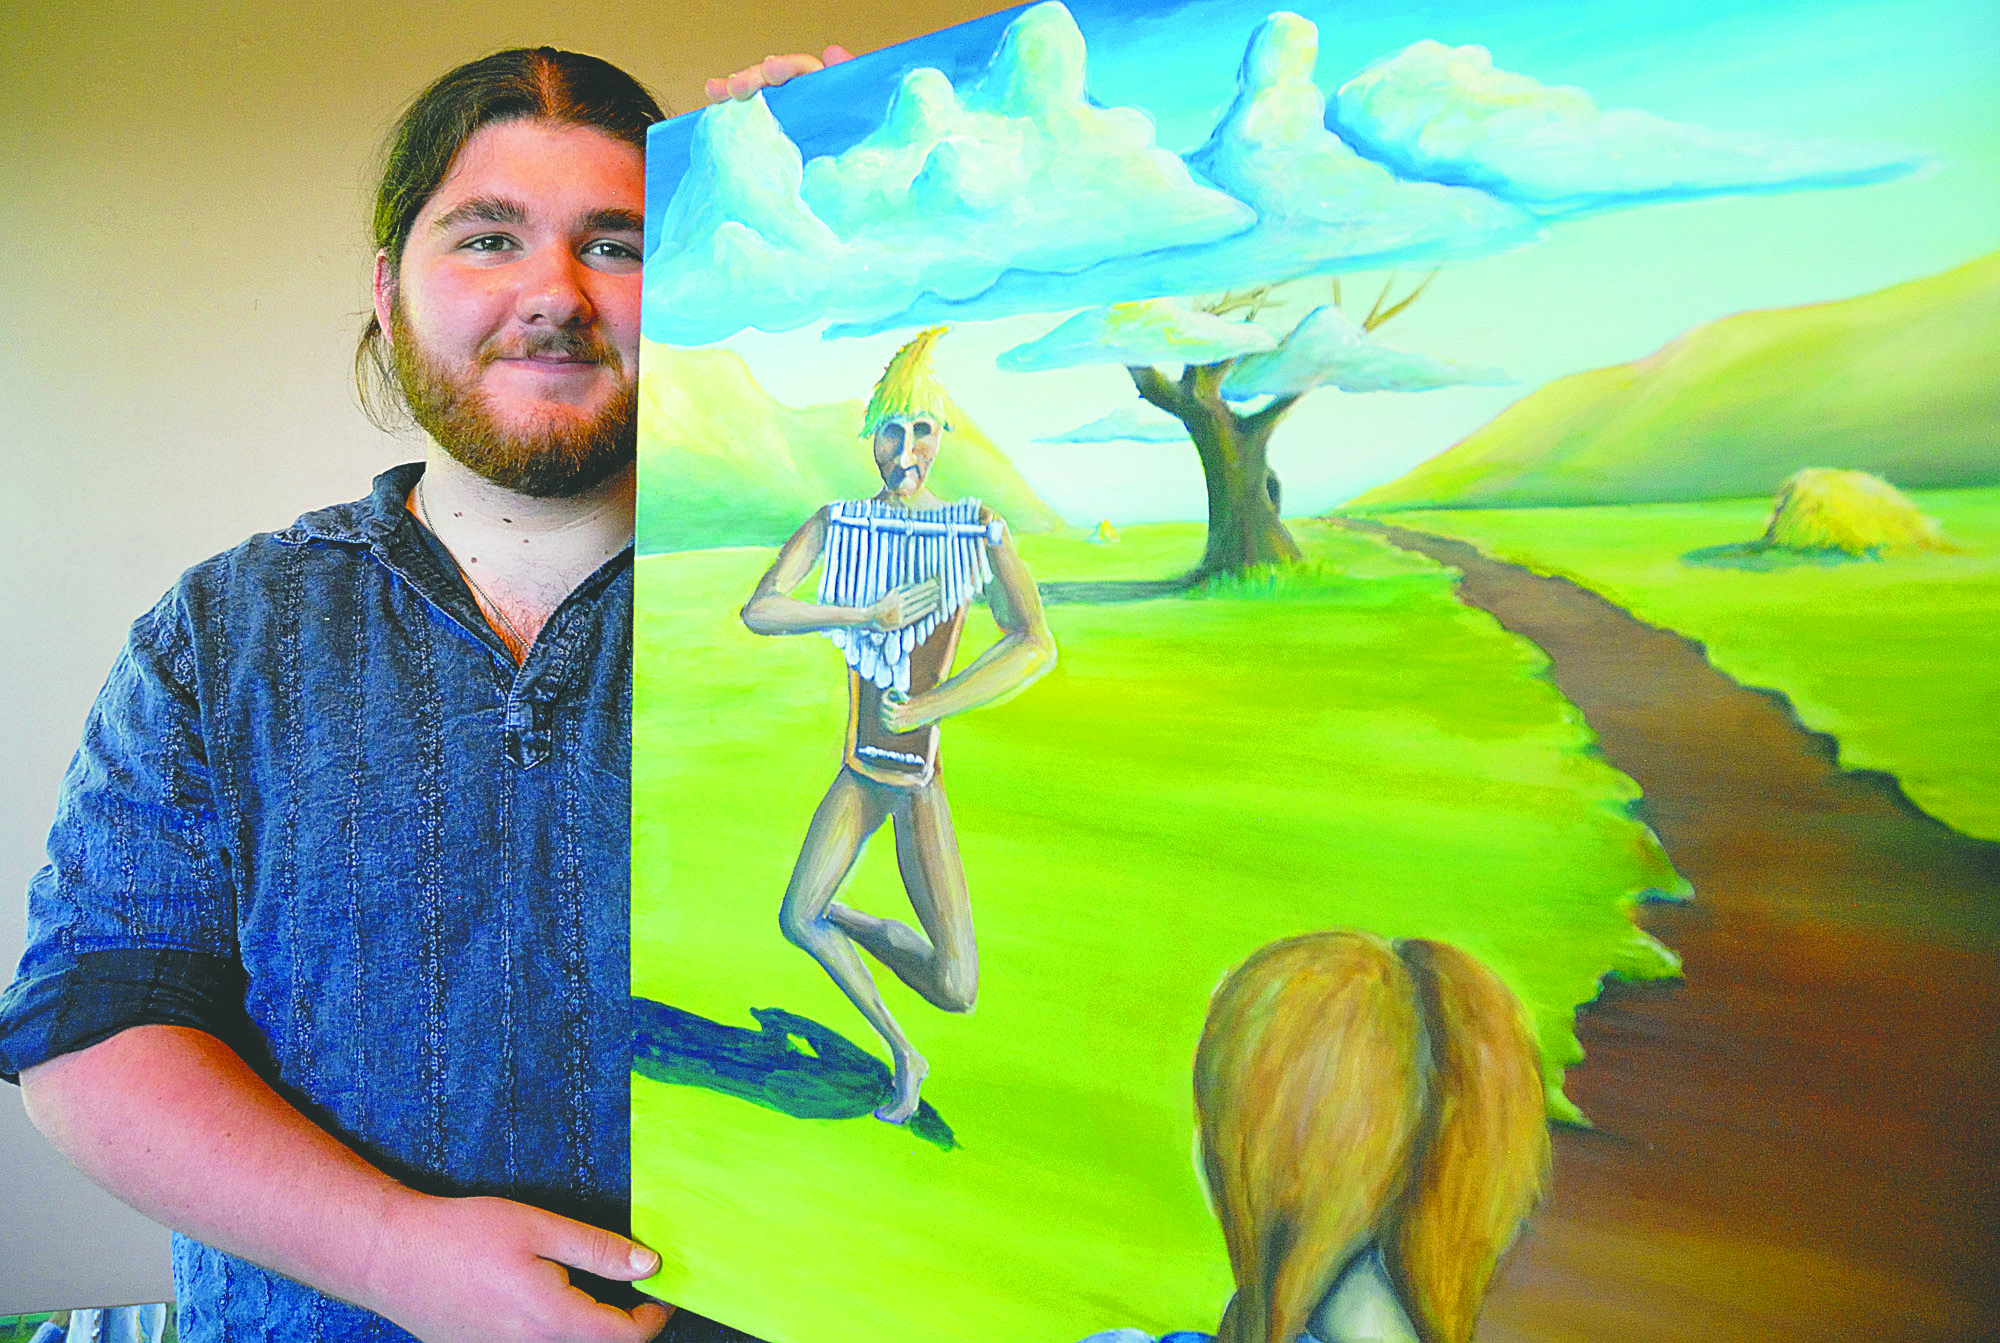 Patrick Carpenter displays one of his paintings inspired by “The Wizard of Oz” at the Port Angeles Fine Arts Center on Monday. Chris Tucker/Peninsula Daily News